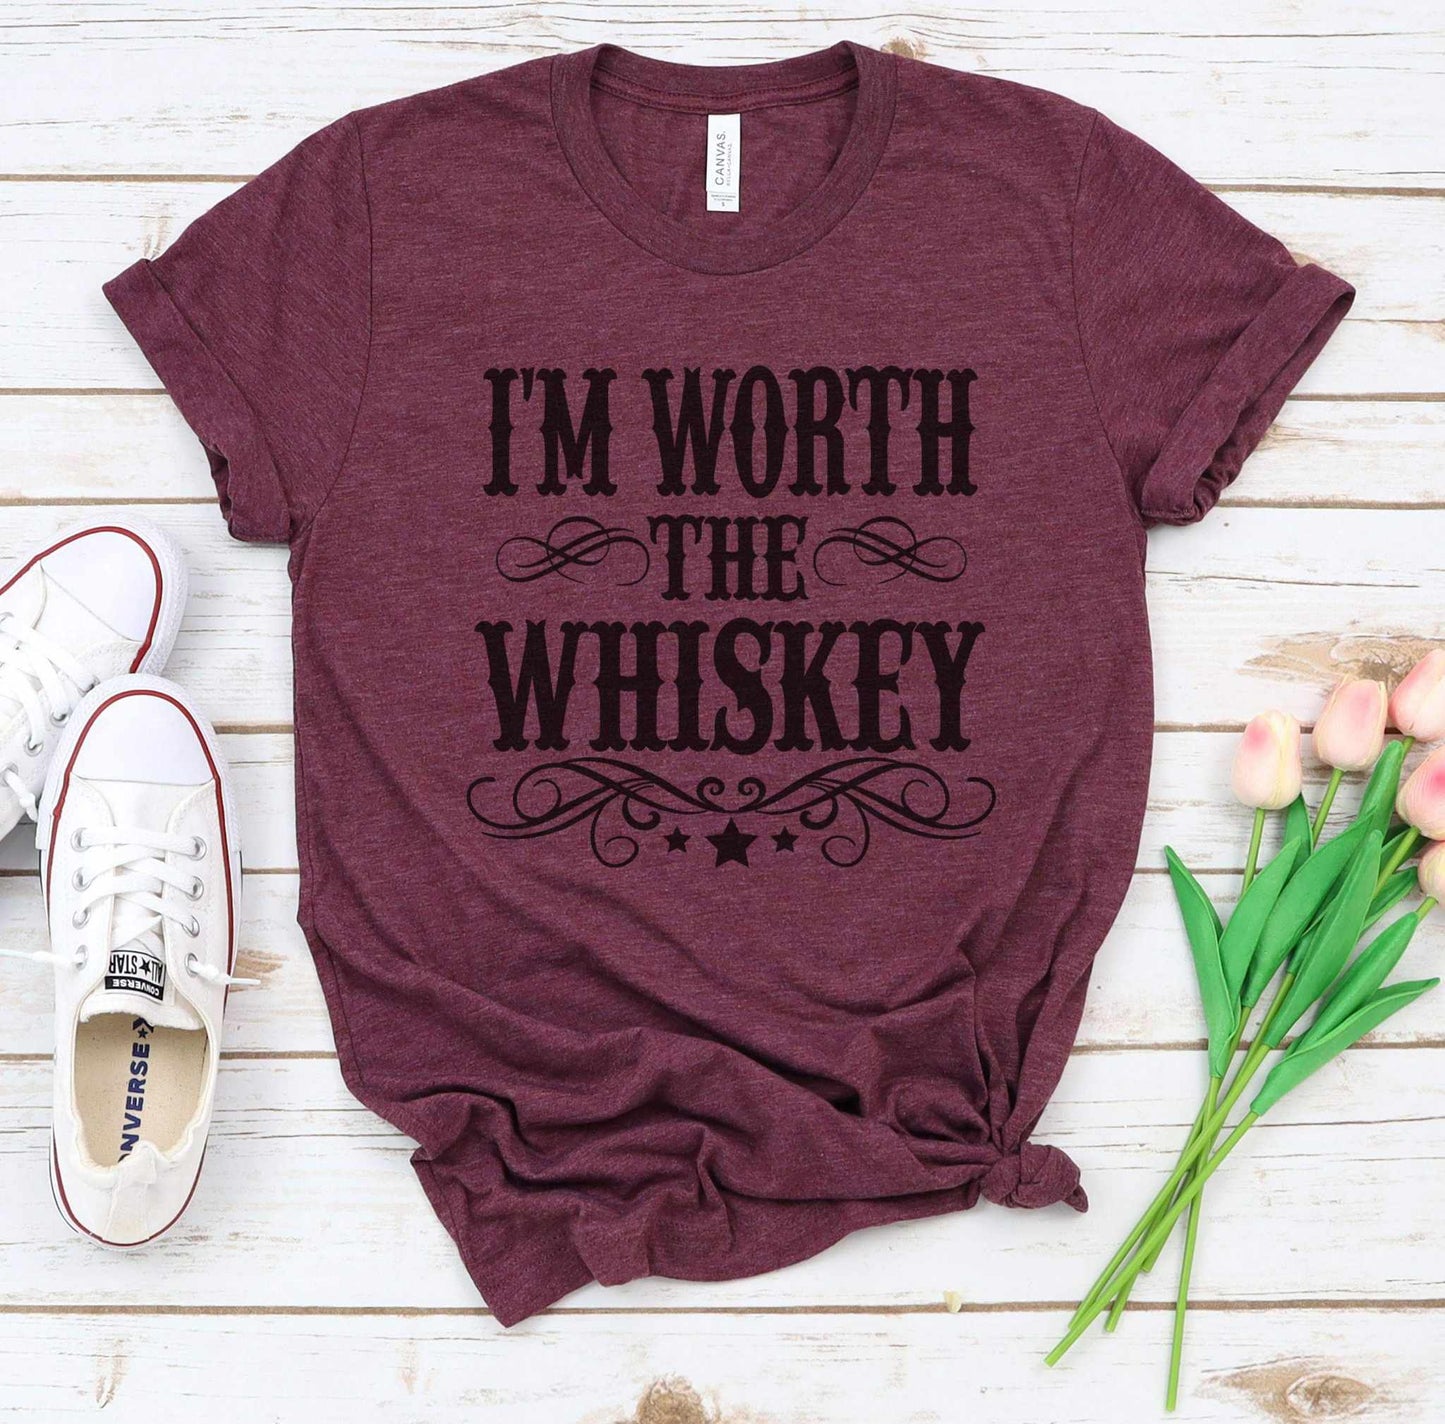 I'm Worth the Whiskey Graphic Tee